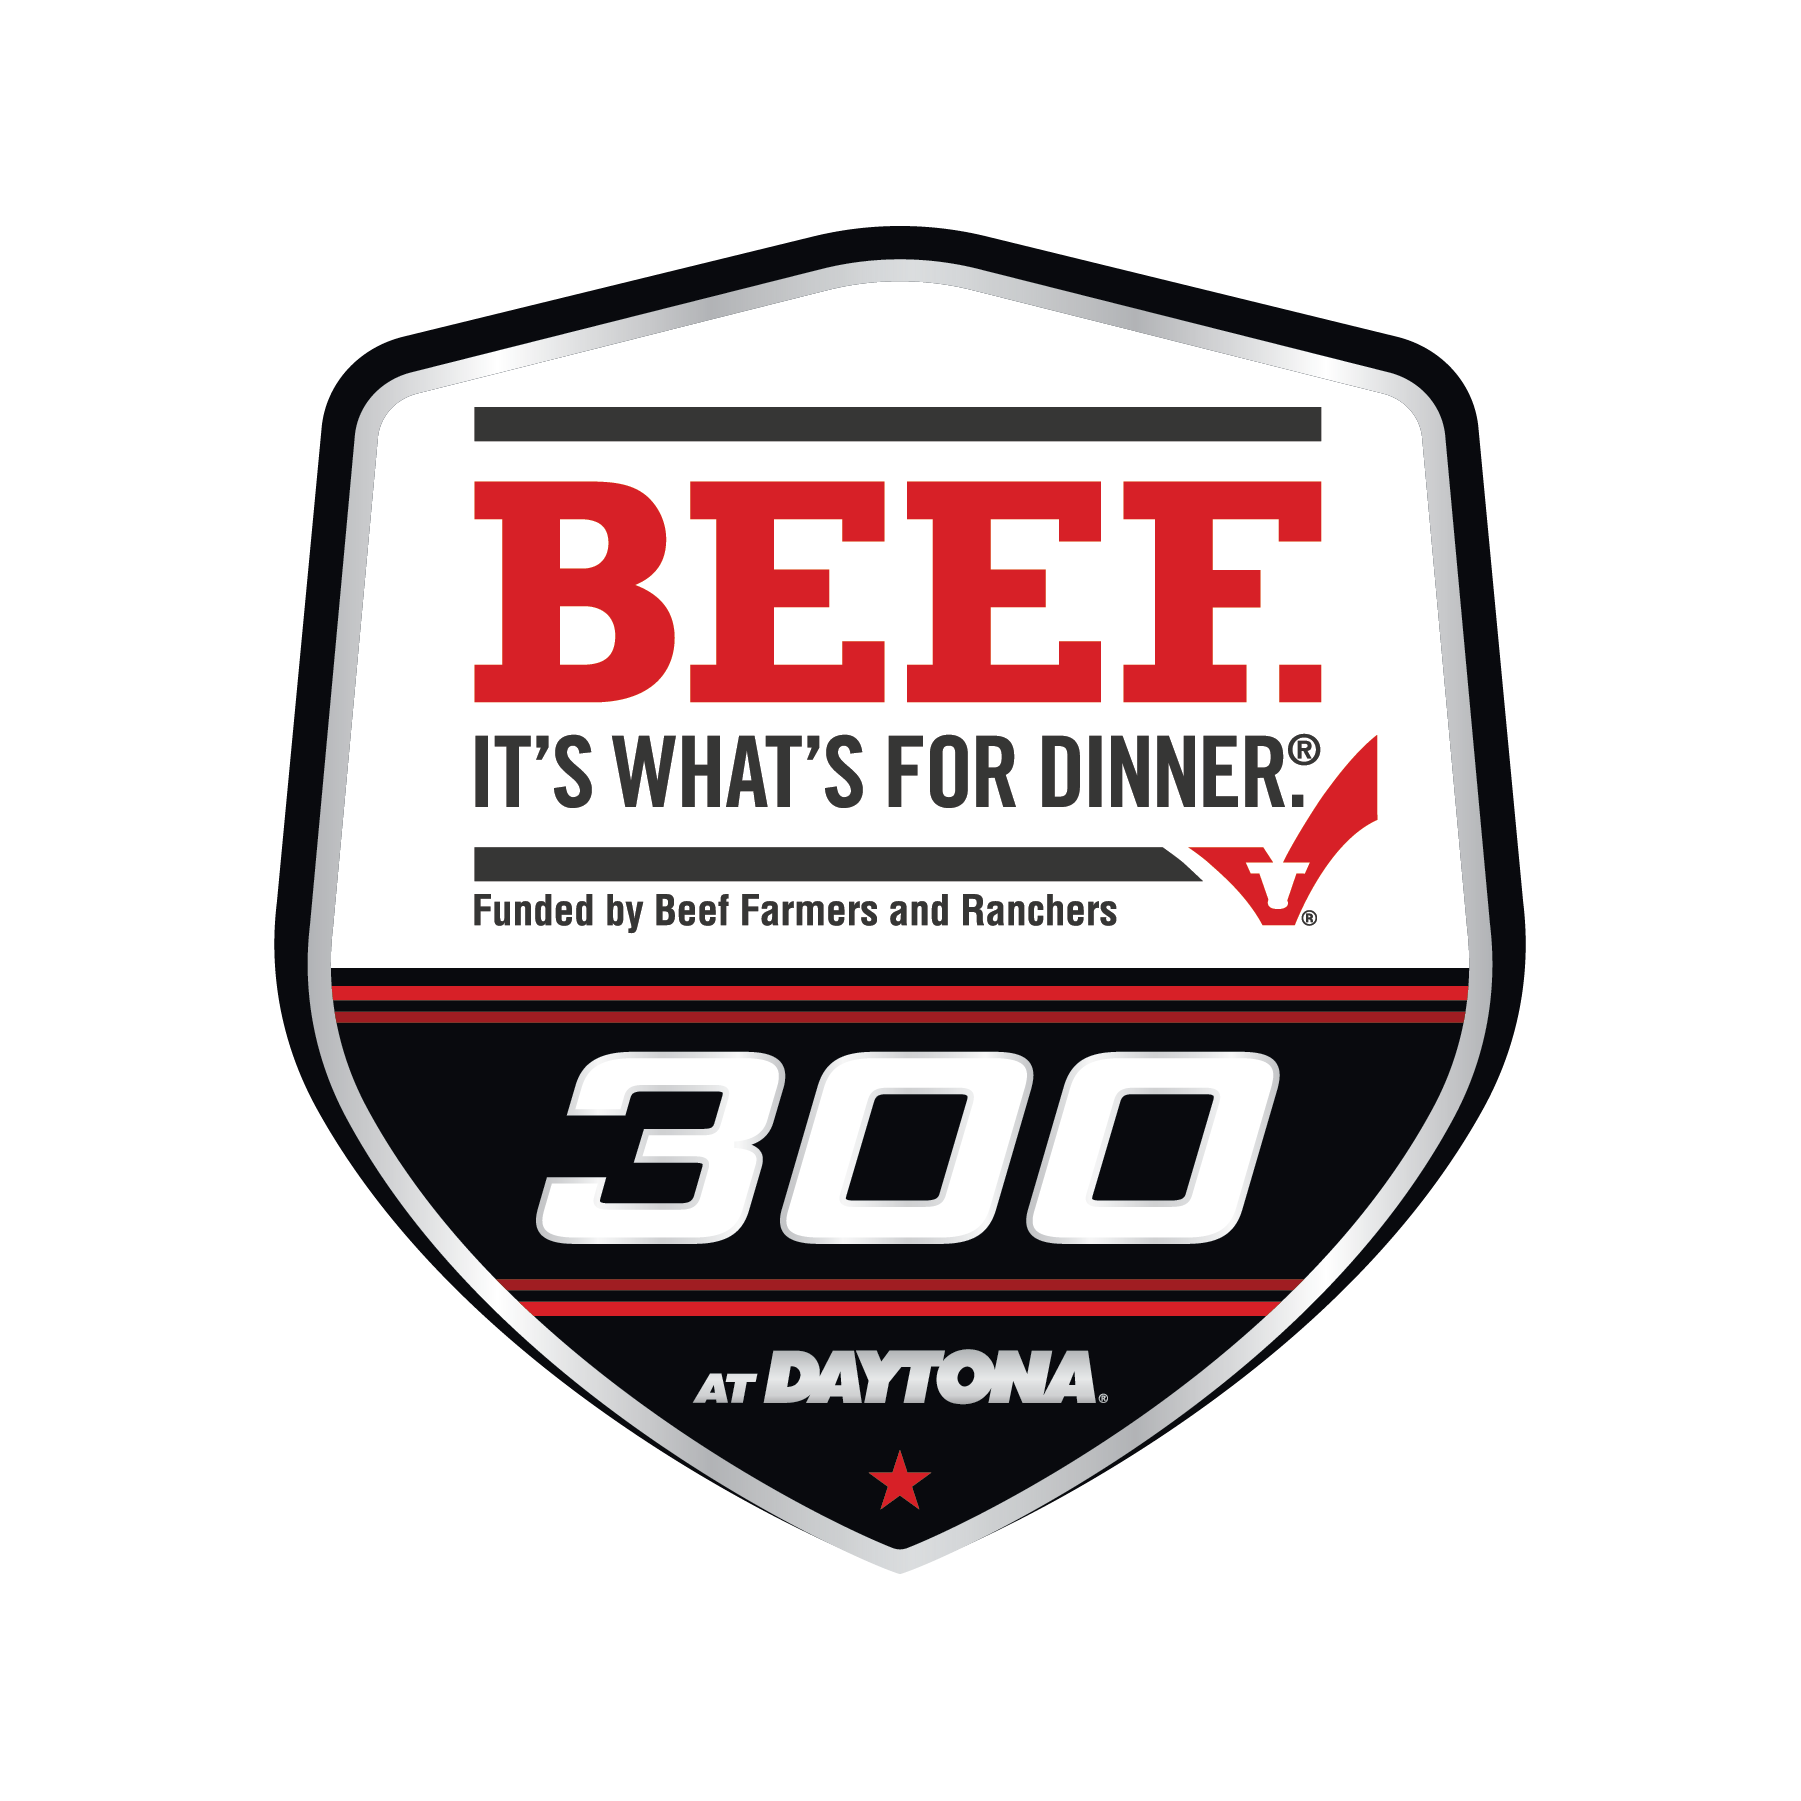 Beef. It’s What’s For Dinner. 300